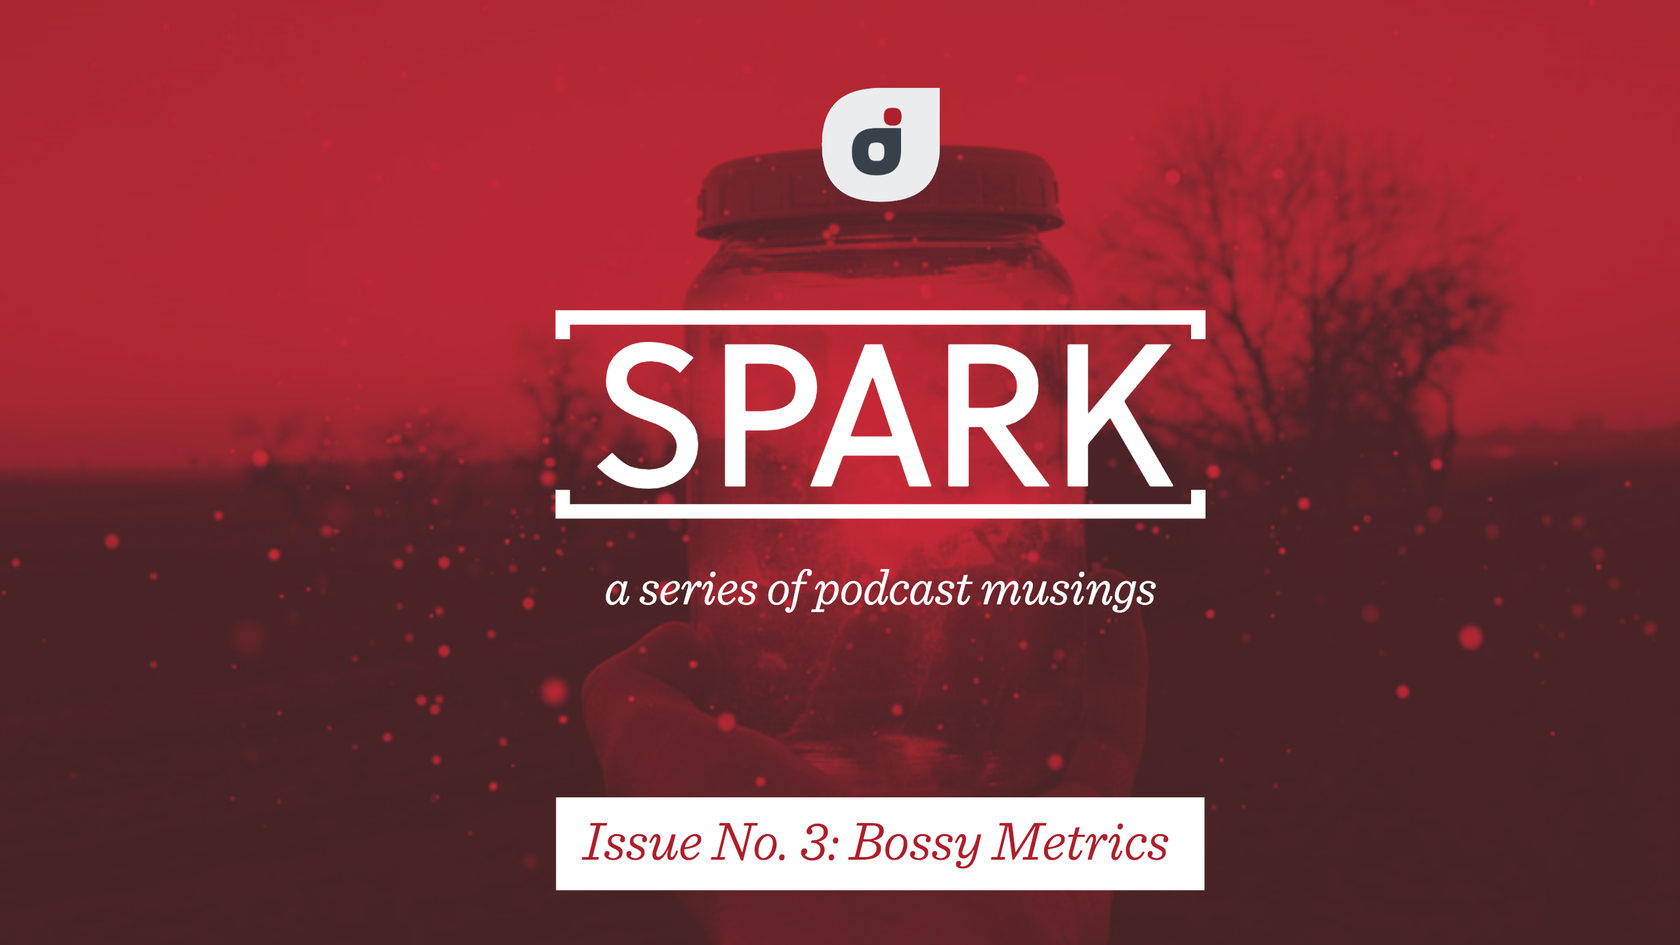 Musings on Top Podcasts from Robby Fowler: Issue 3 entitled Bossy Metrics from the Reply All podcast